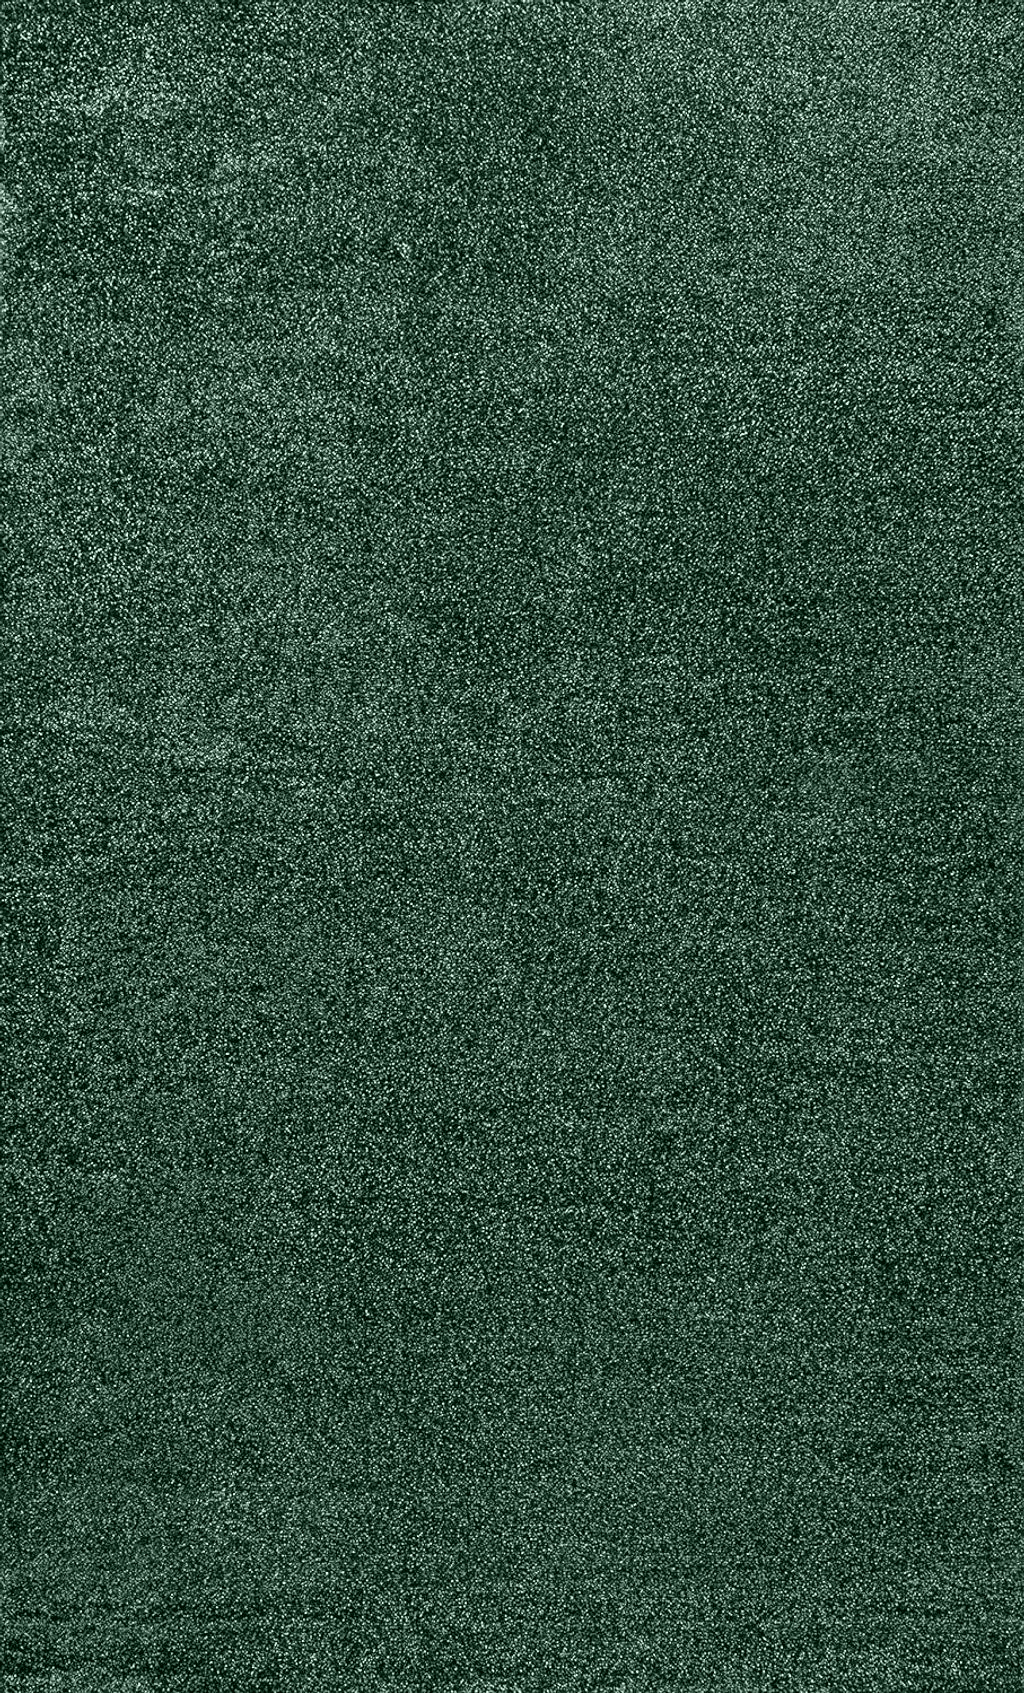 Area Green JONATHAN Y SEU100L-8 Haze Solid Low-Pile Indoor Area-Rug Casual Contemporary Solid Traditional Easy-Cleaning Bedroom Kitchen Living Room Non Shedding, 8 ft x 10 ft, Emerald